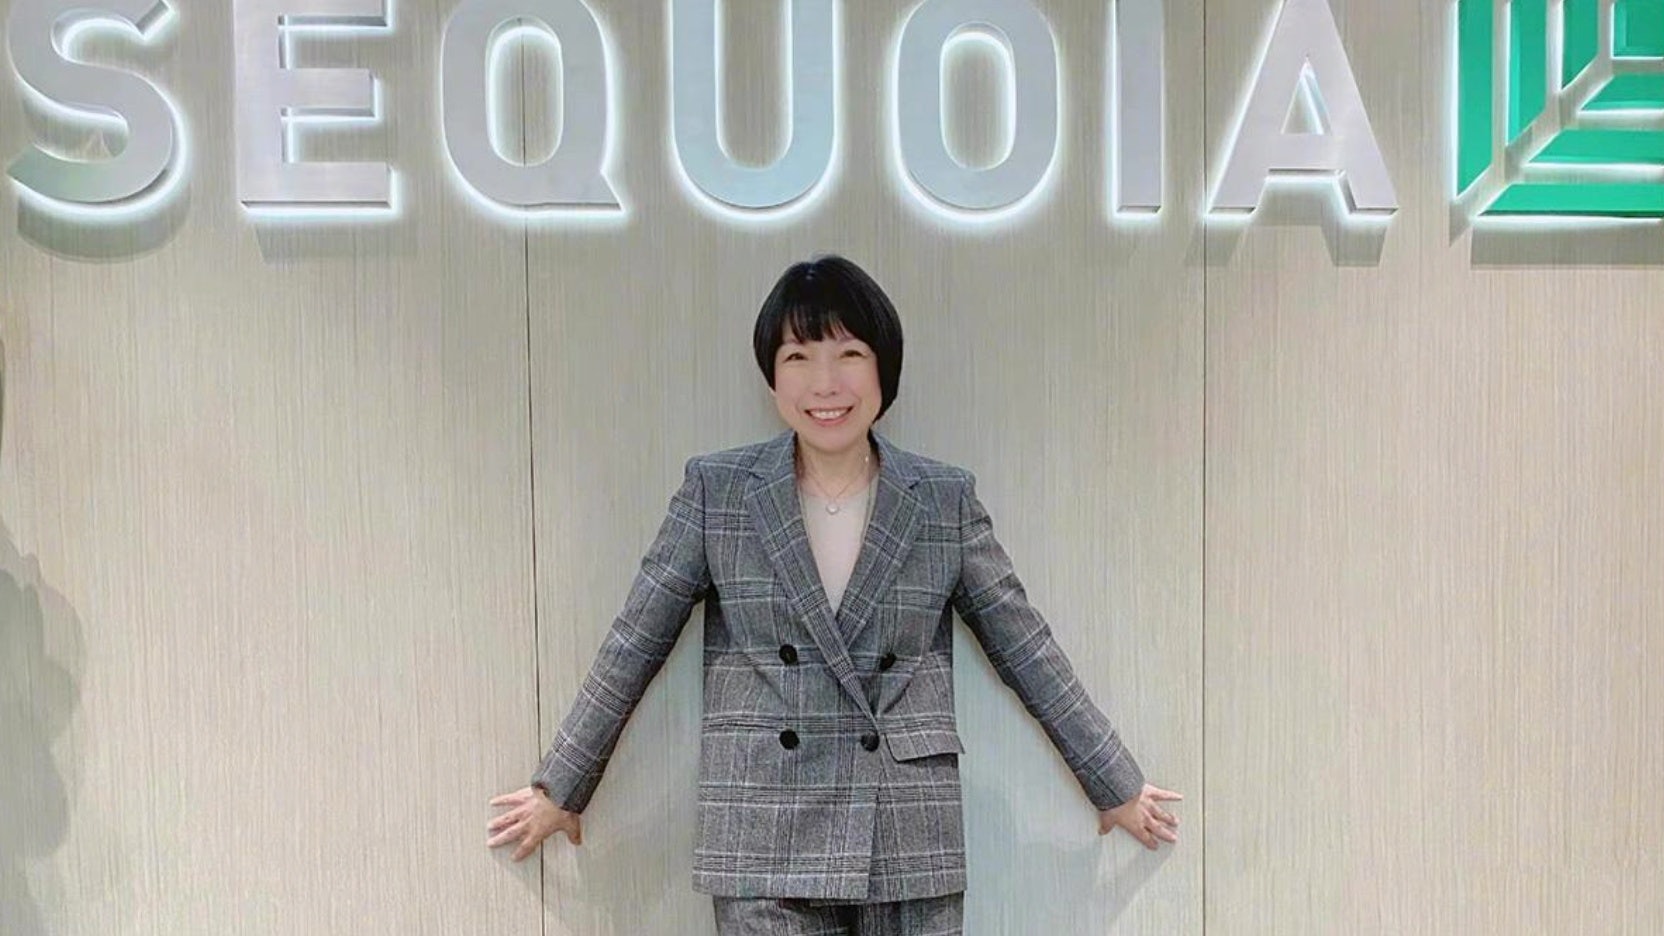 Angelica Cheung’s new role at Sequoia Capital China as a venture partner promises greater opportunity for China’s homegrown talent and international brands. Photo: Angelica Cheung's Instagram